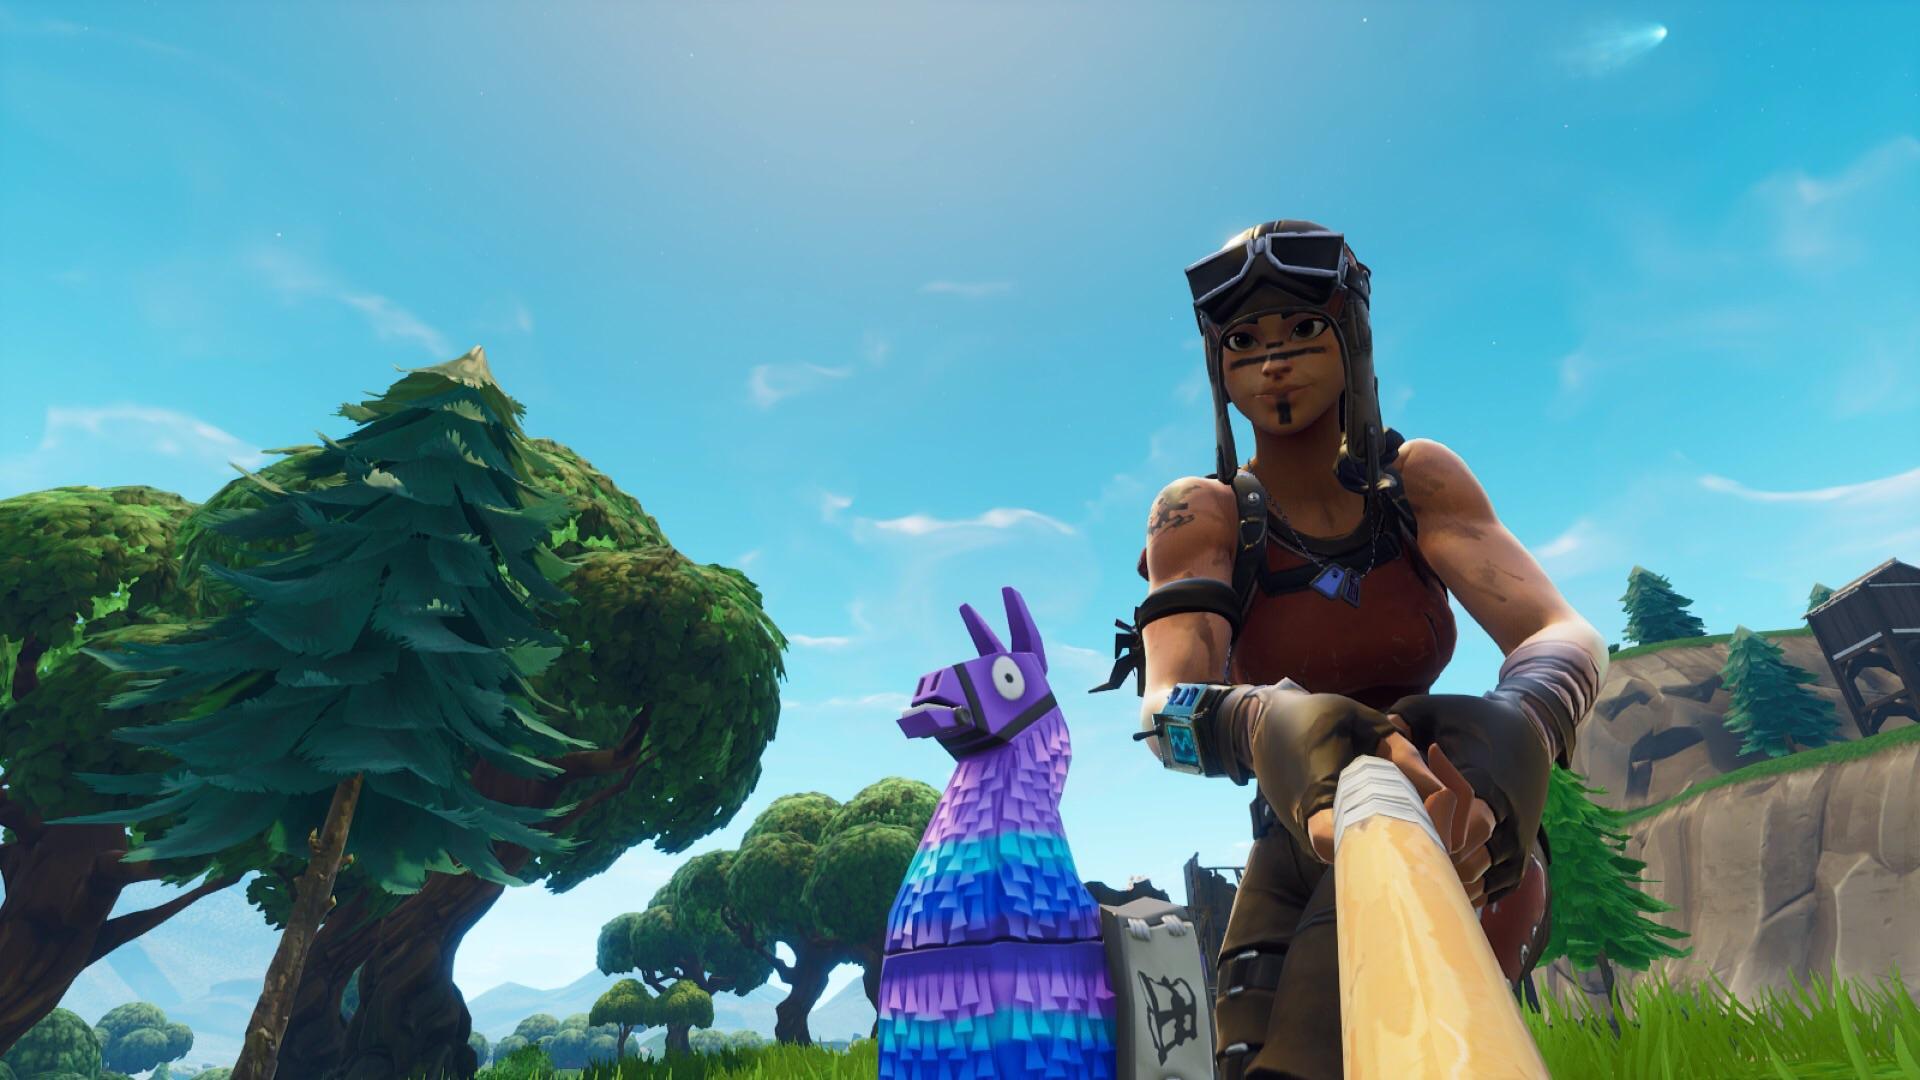 Took a selfie with a llama, ended up getting the comet too